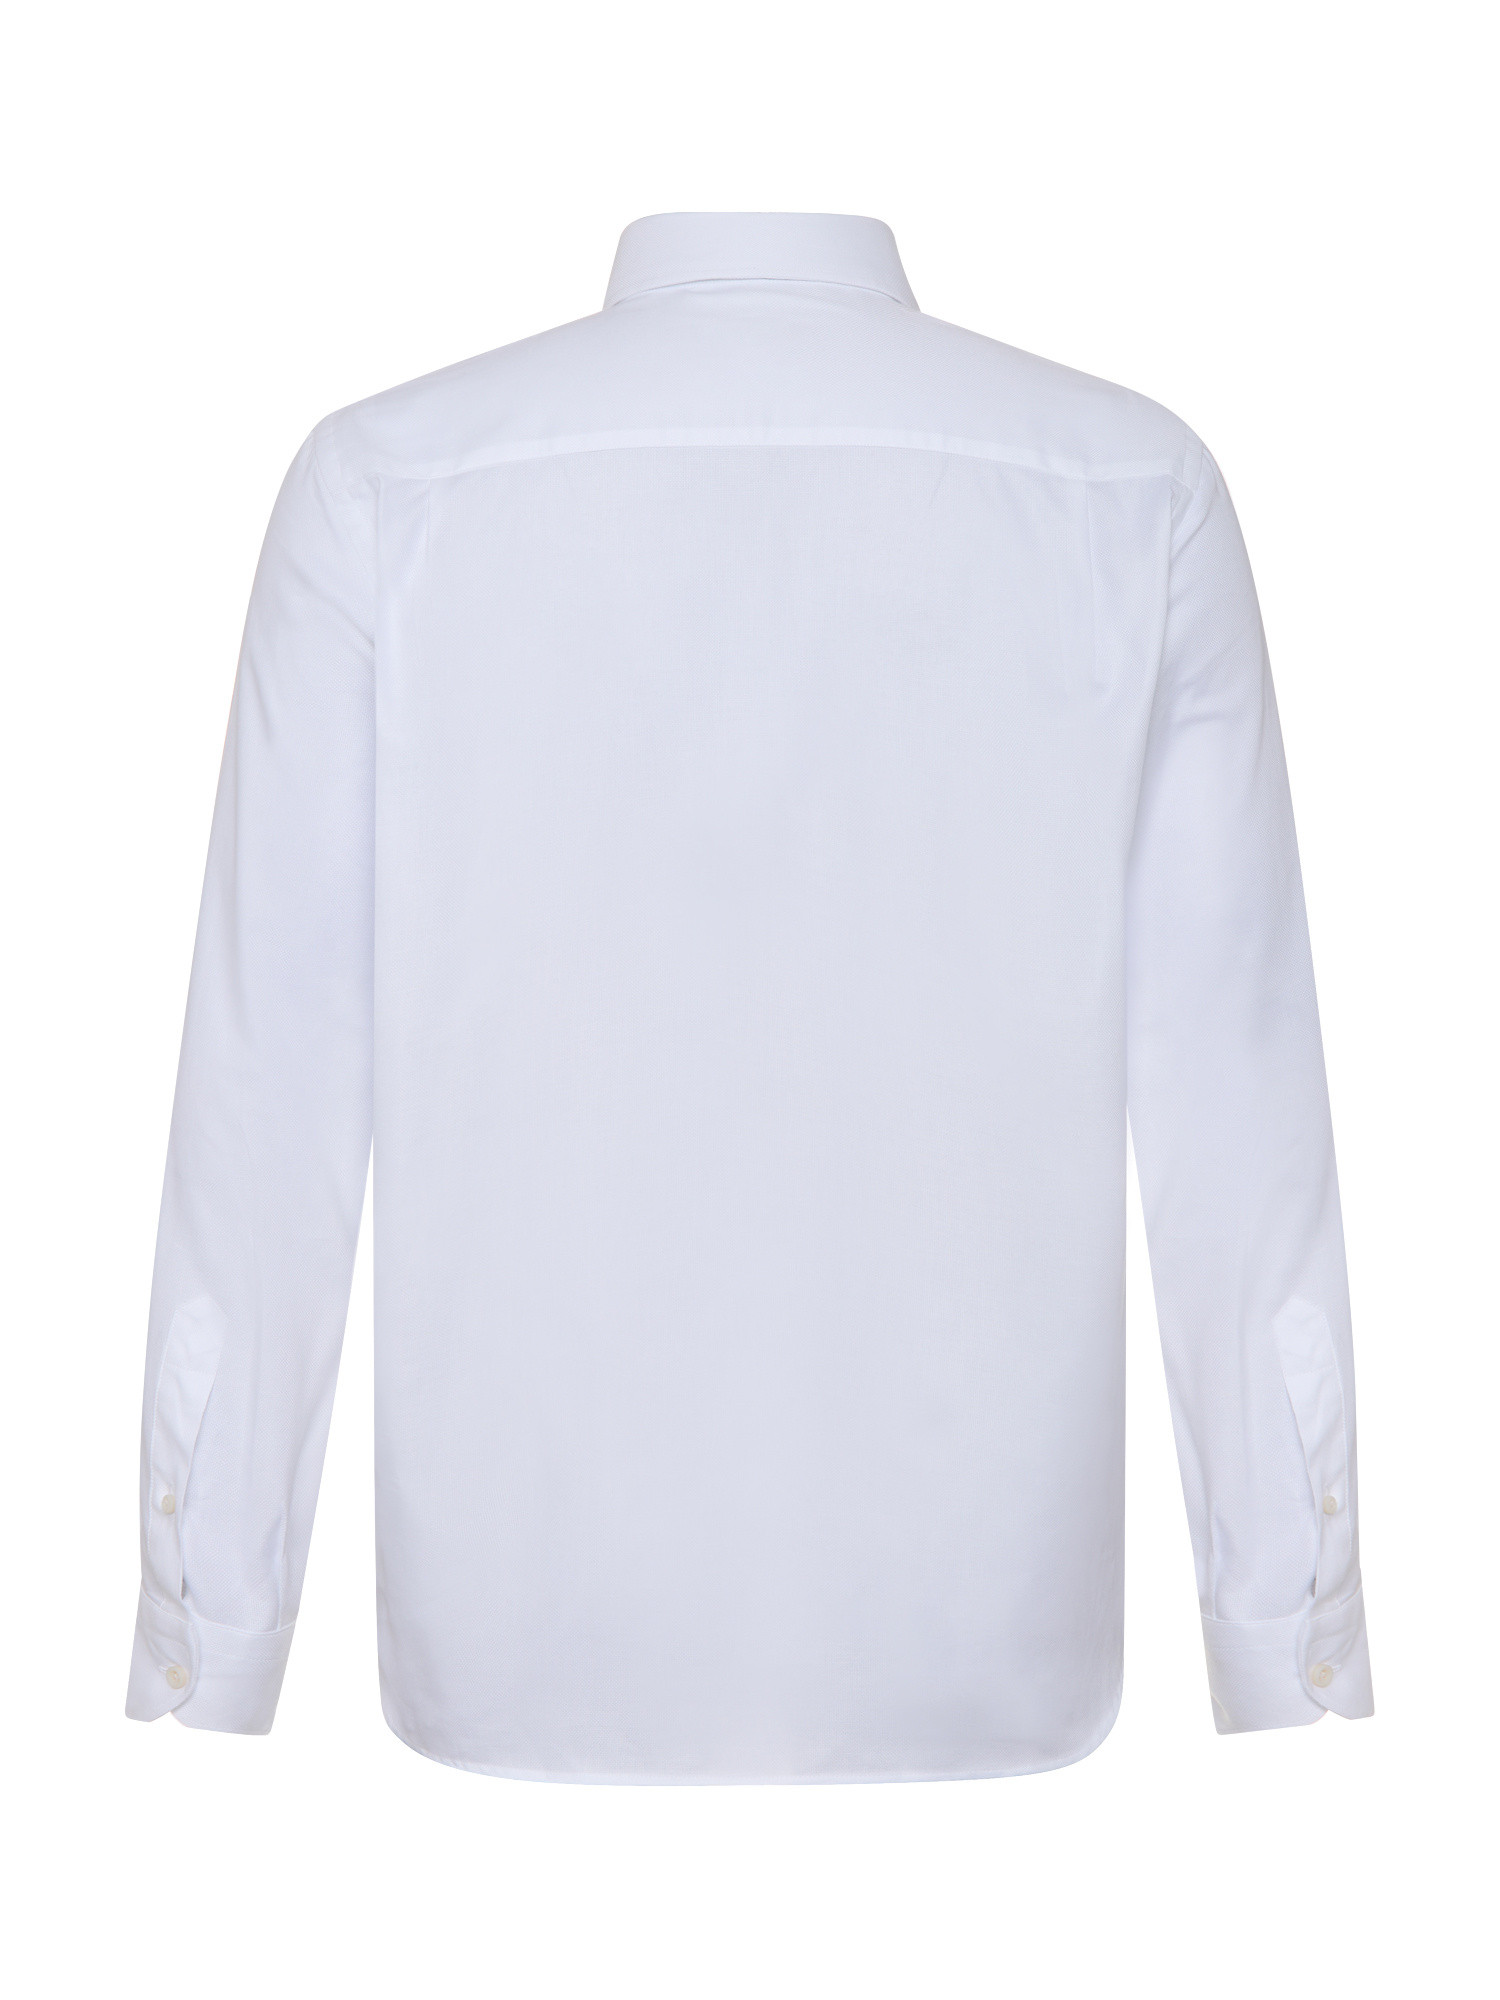 Luca D'Altieri - Regular fit chasuble shirt in pure textured cotton, White, large image number 2